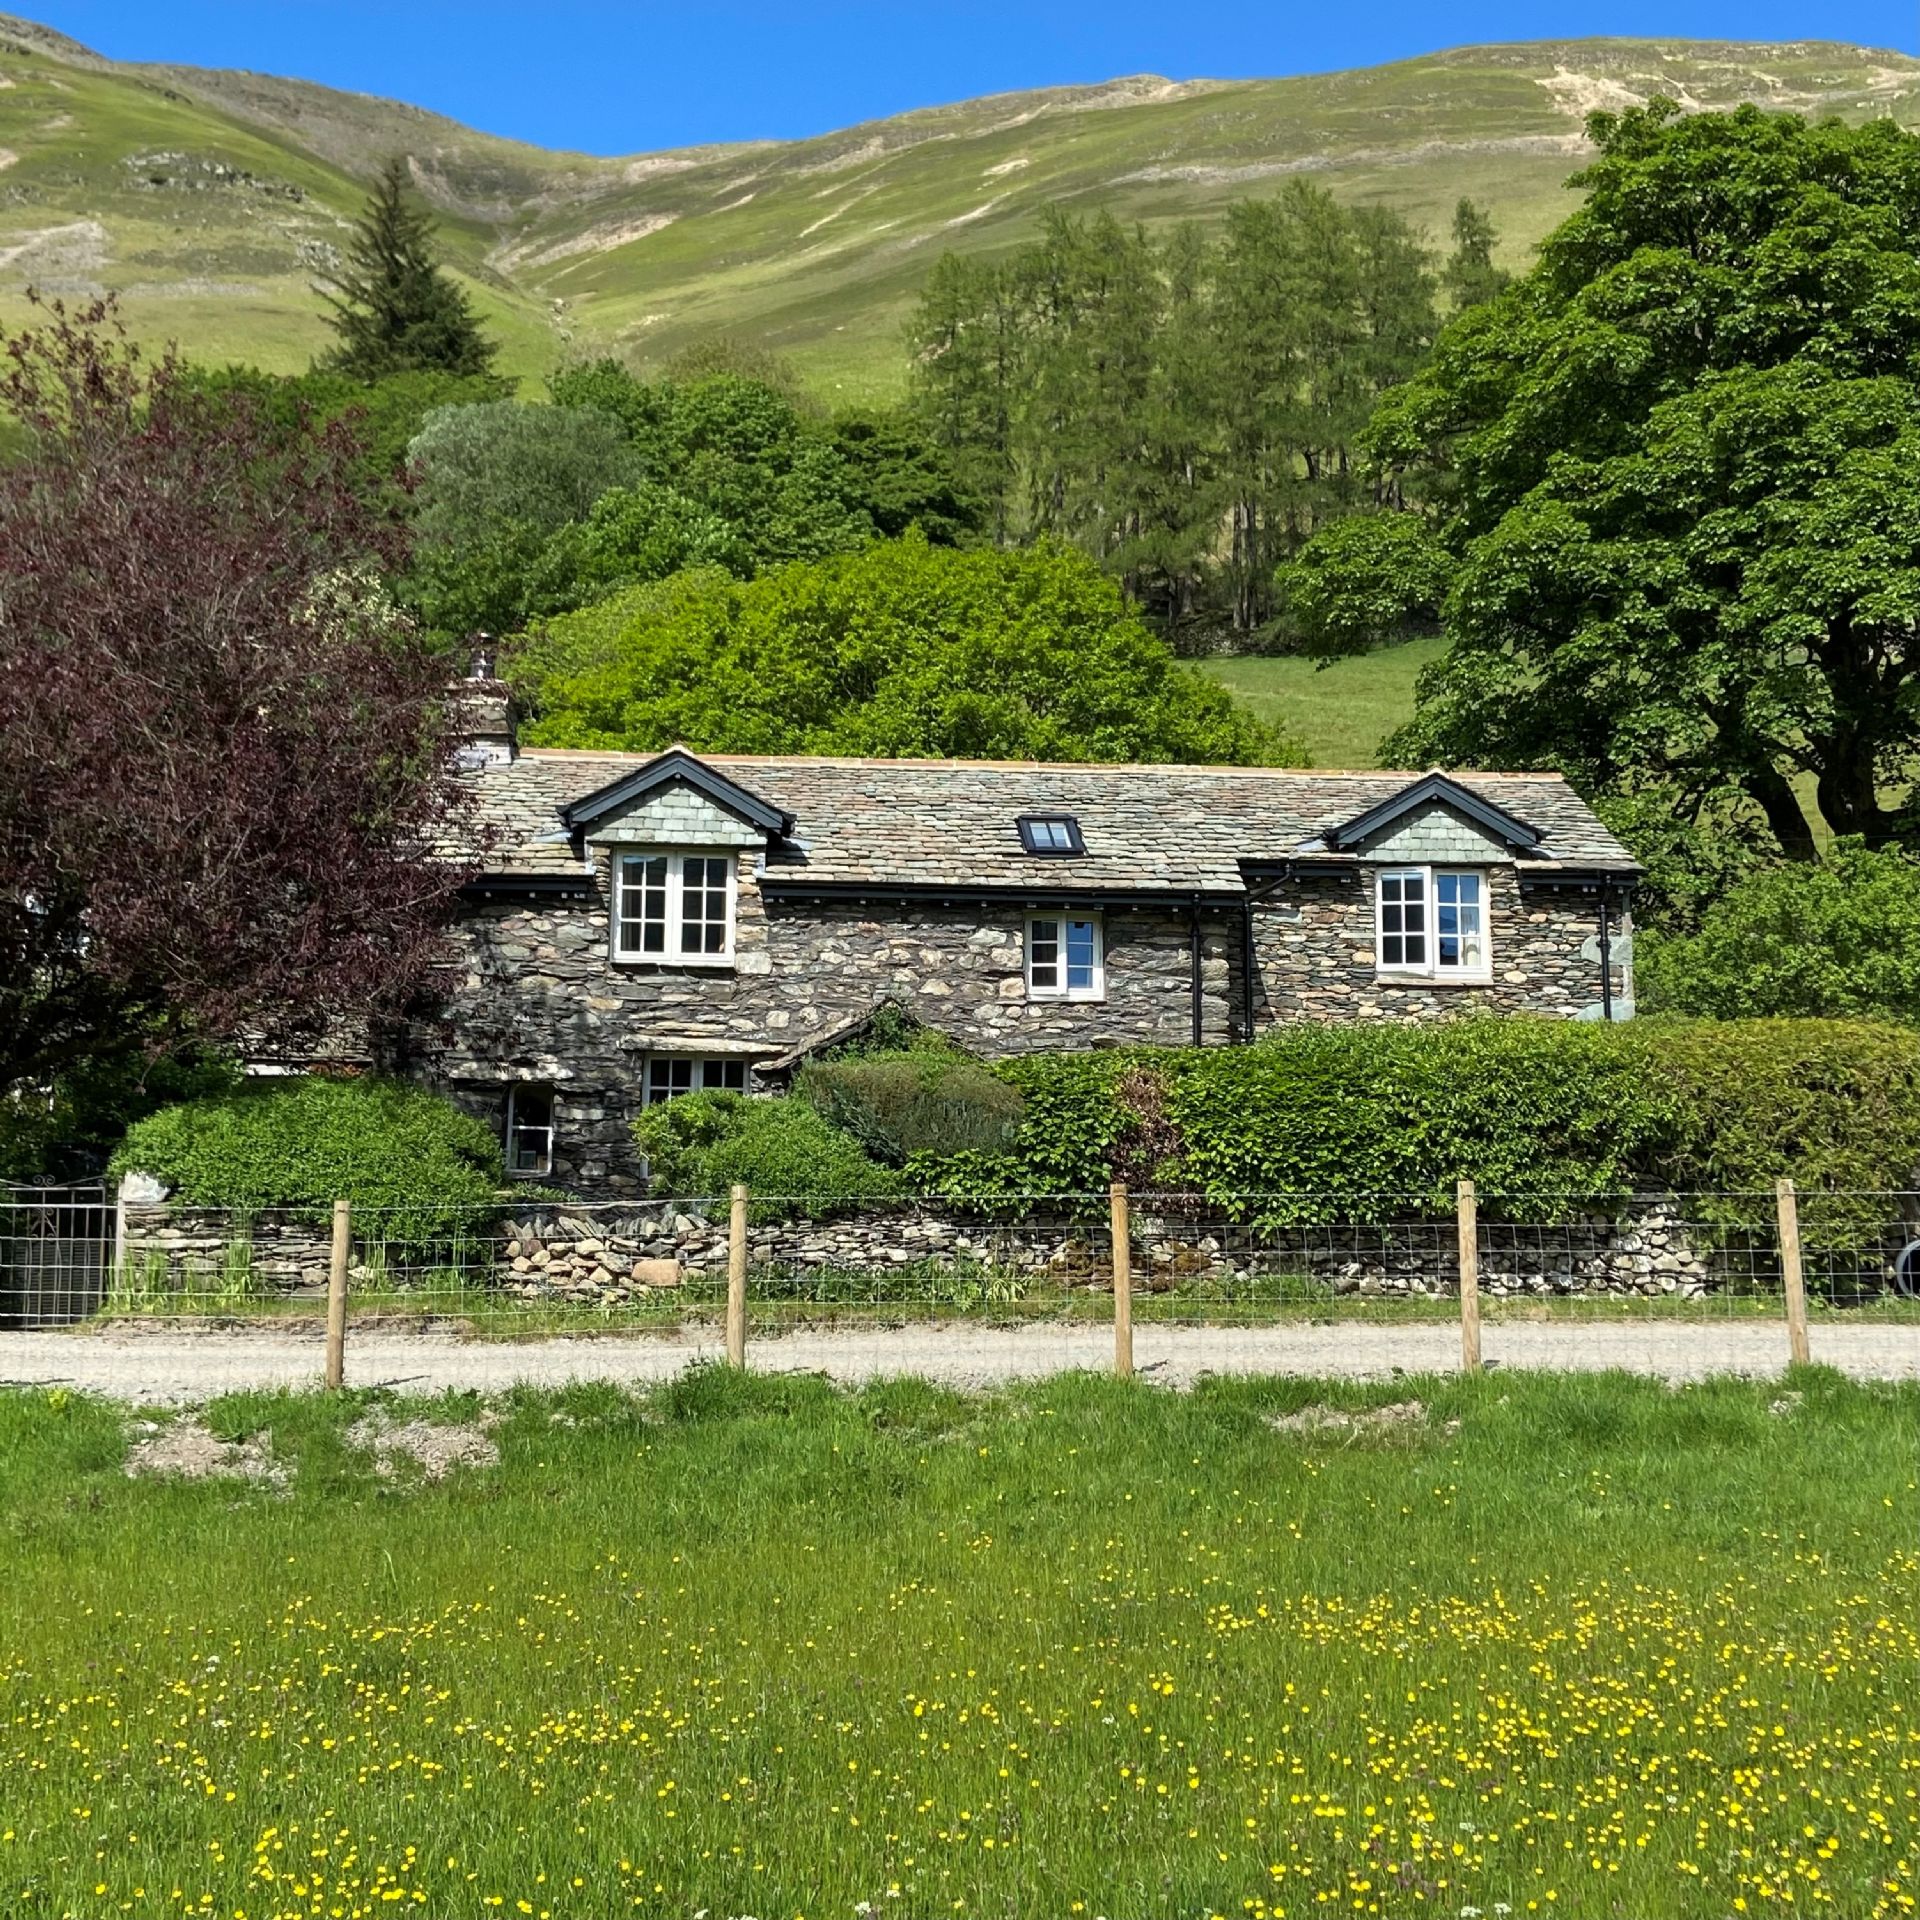 High Beckside Cottages situated in the hamlet of Hartsop, Ullswater